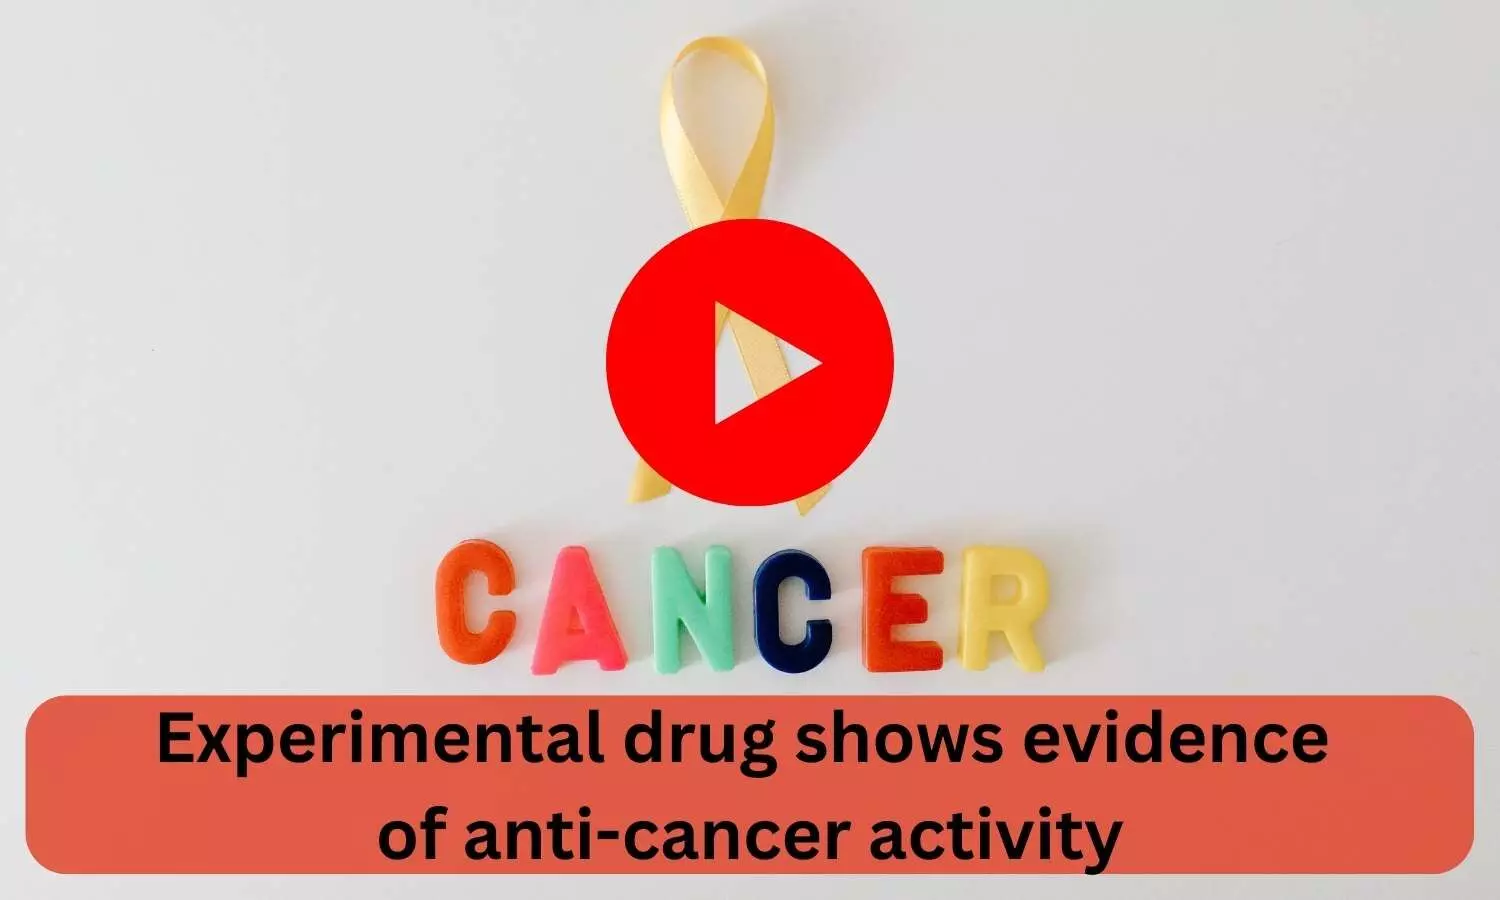 Experimental drug shows evidence of anti-cancer activity